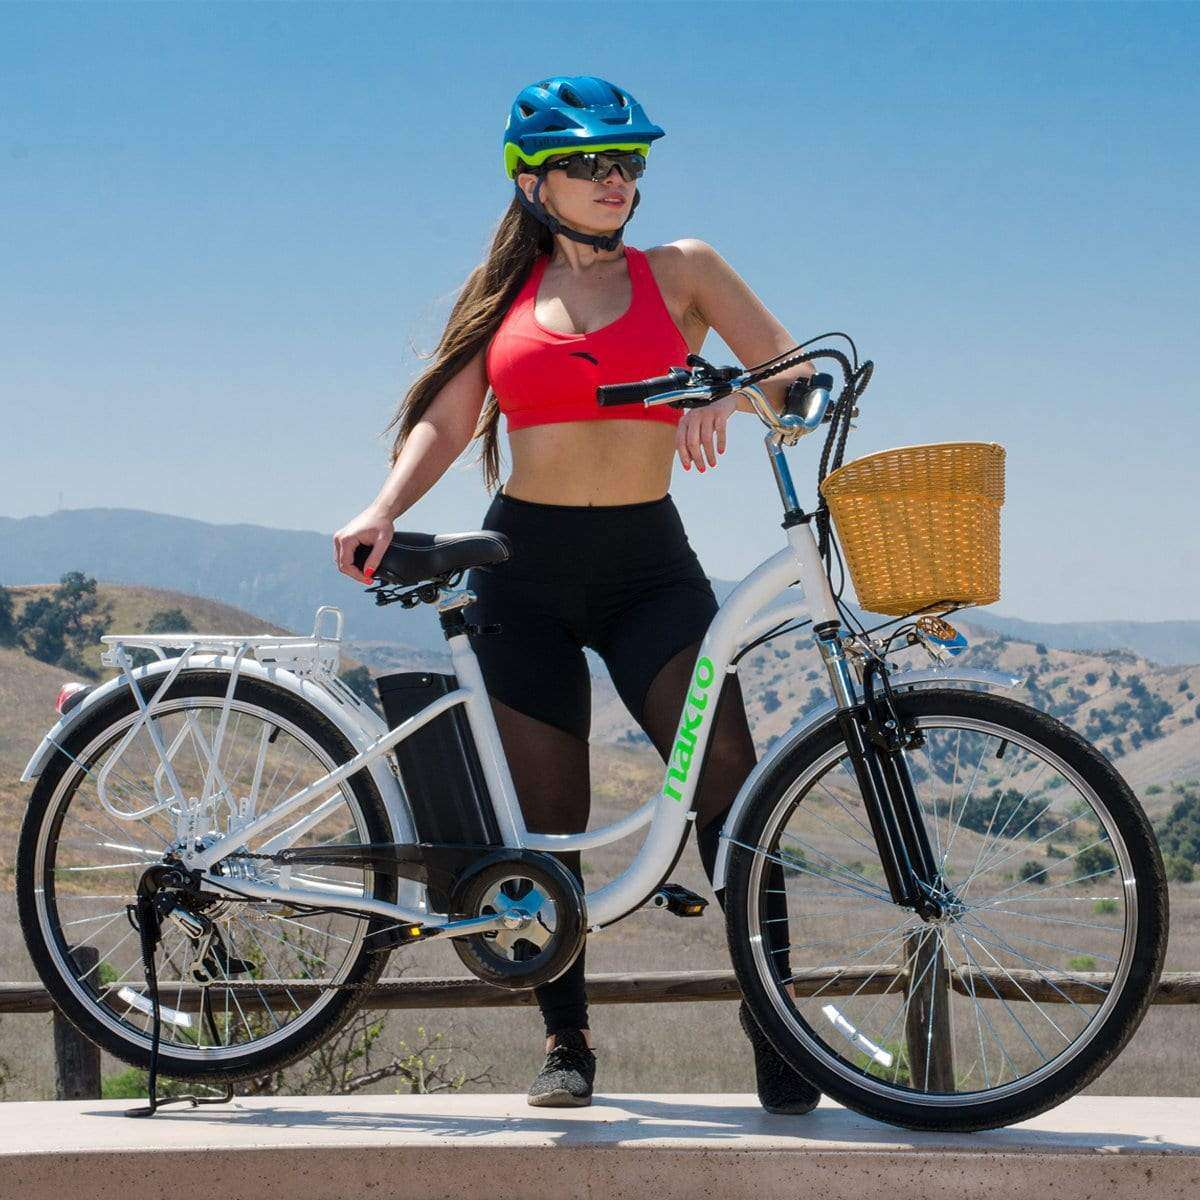 NAKTO 26 inch 250W 19 MPH Camel Electric Bicycle 6 Speed E-Bike 36V Lithium Battery Female/Young Adult White New